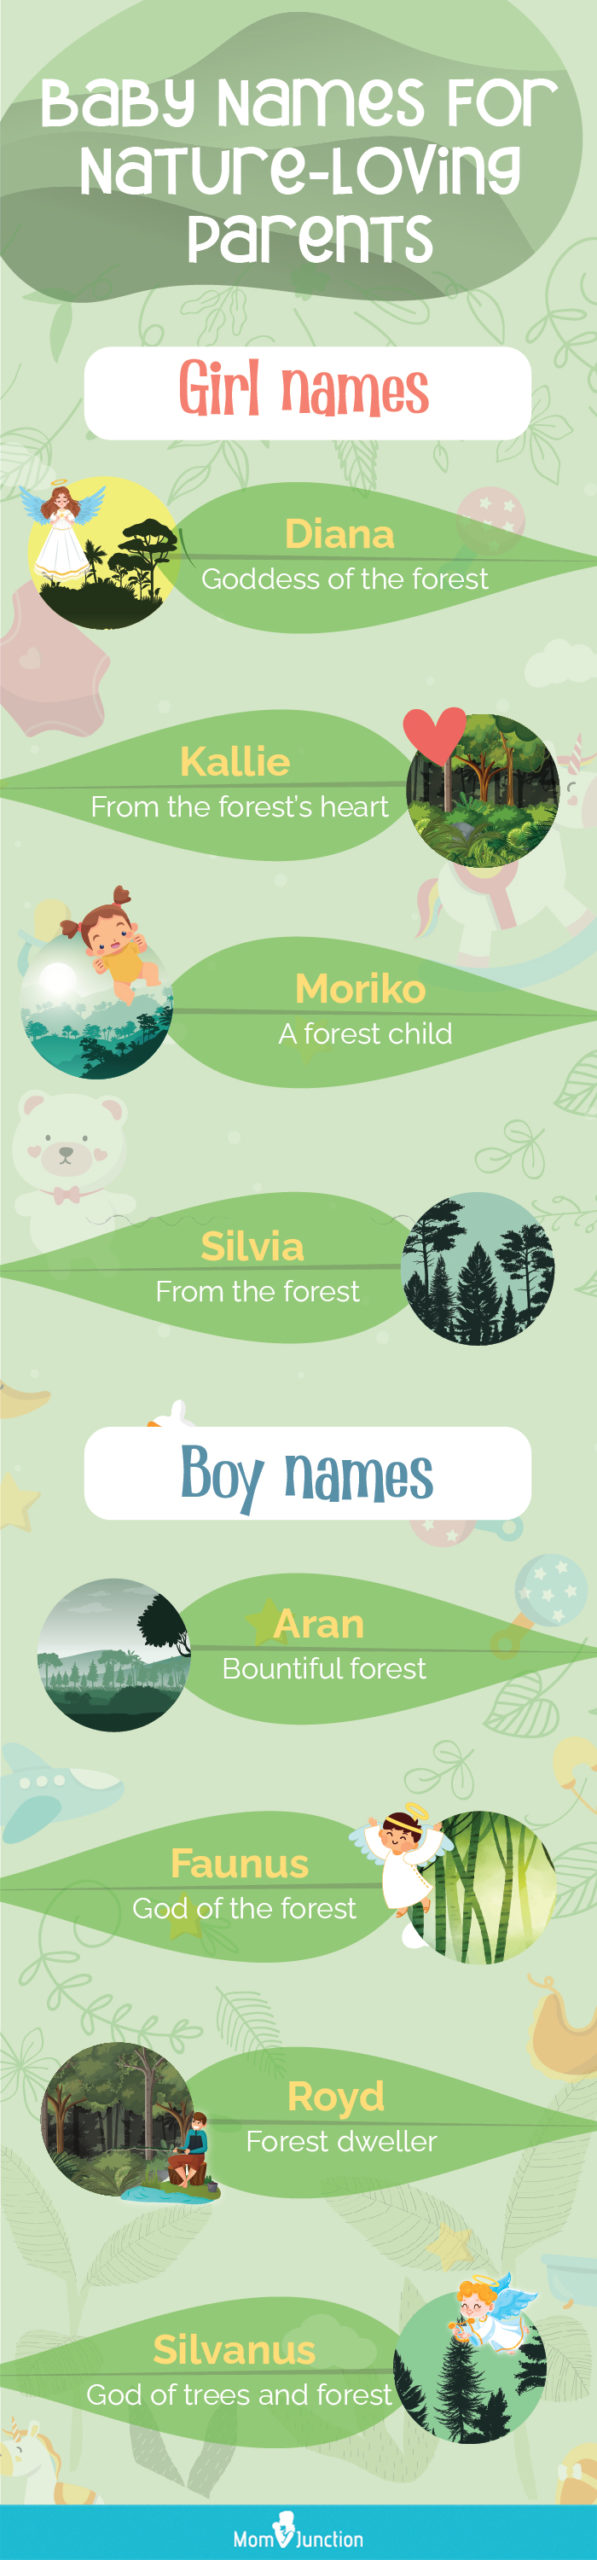 baby names for nature loving parents (infographic)